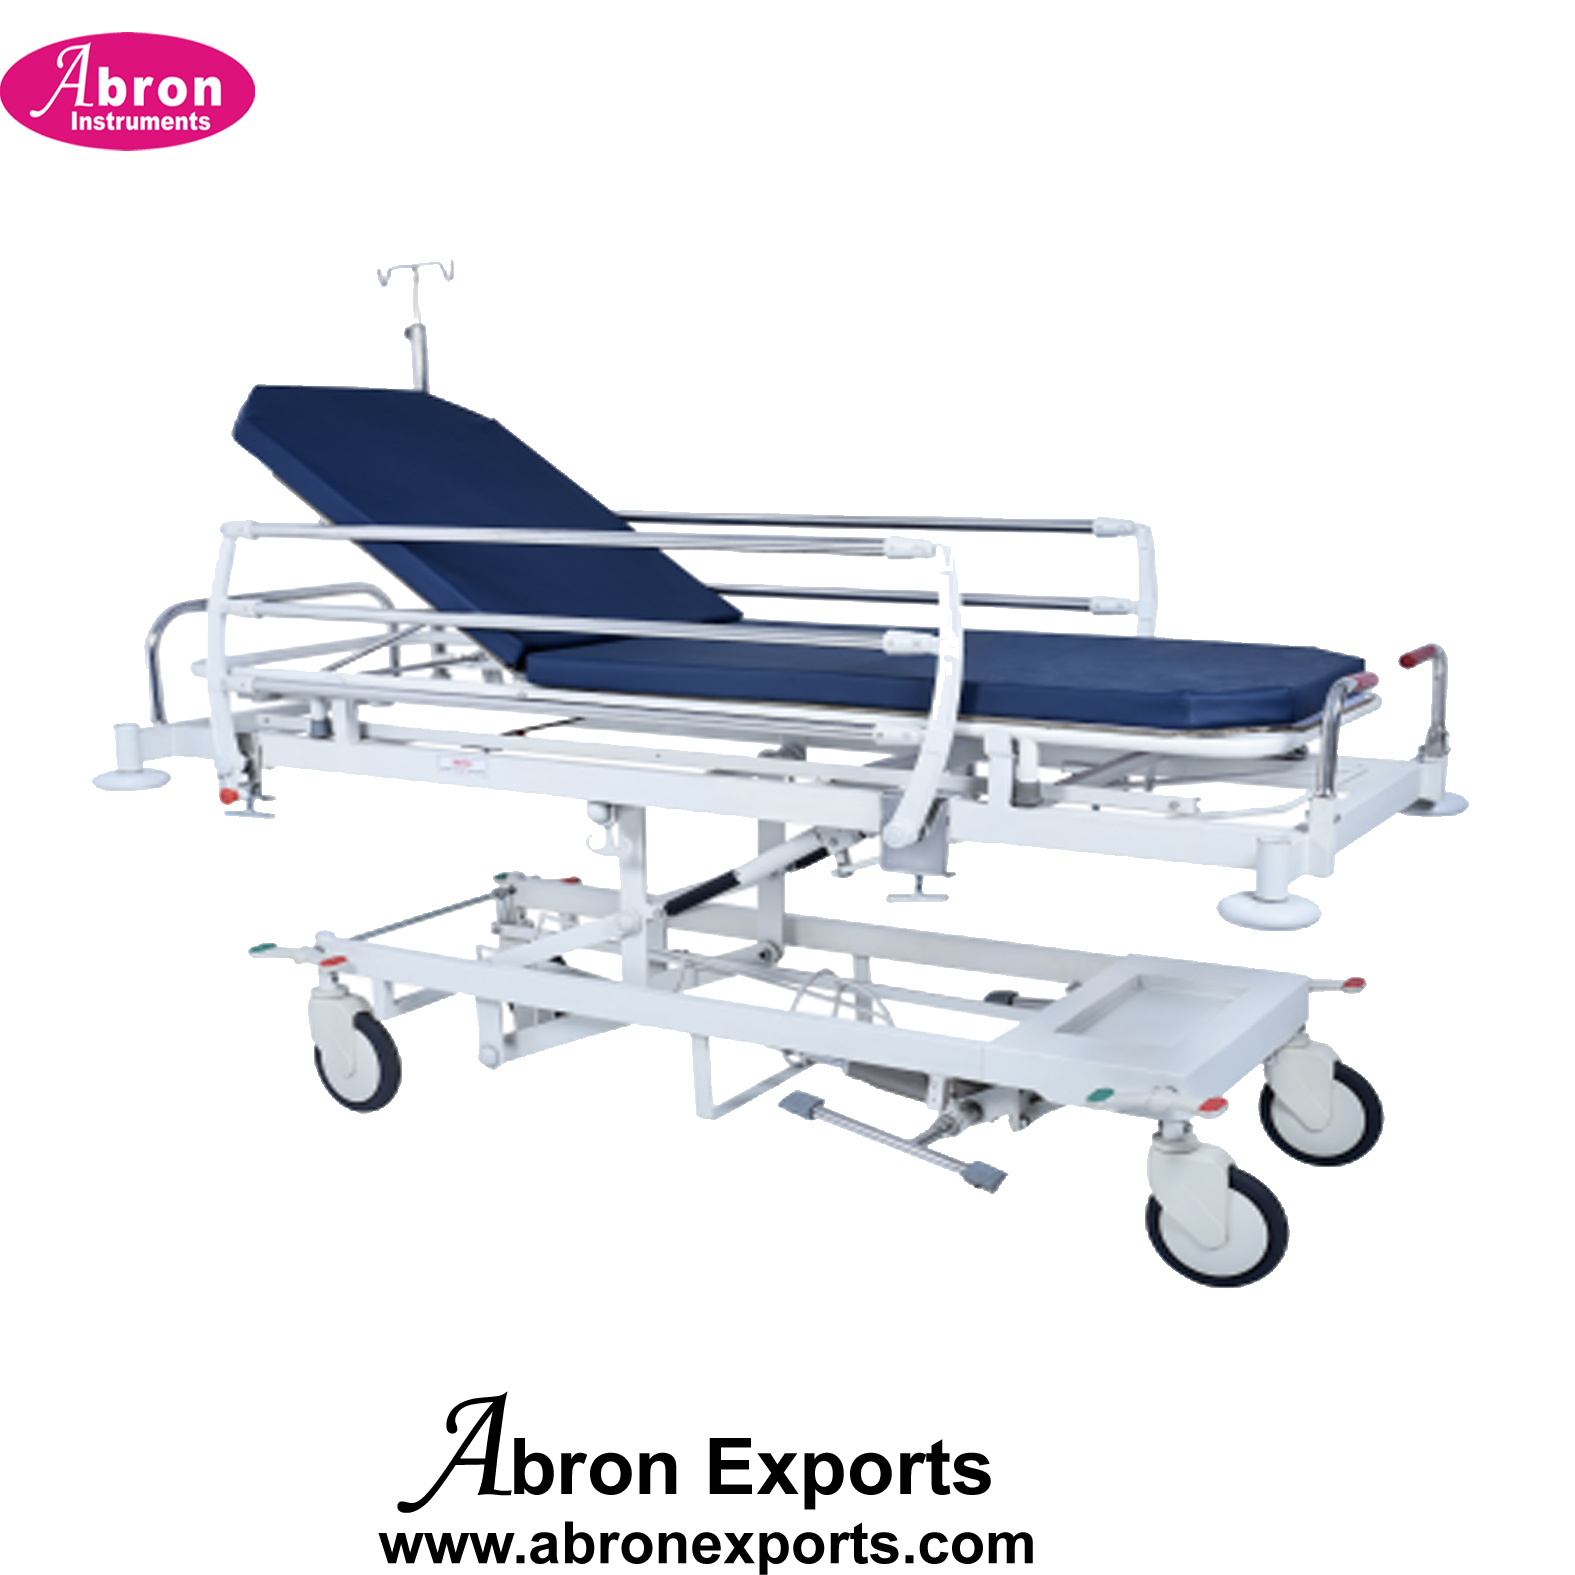 Patient Stretcher Trolley With Matress ICU Emergency & Recovery Stainless Steel Hospital Furniture Abron ABM-2261SR9 